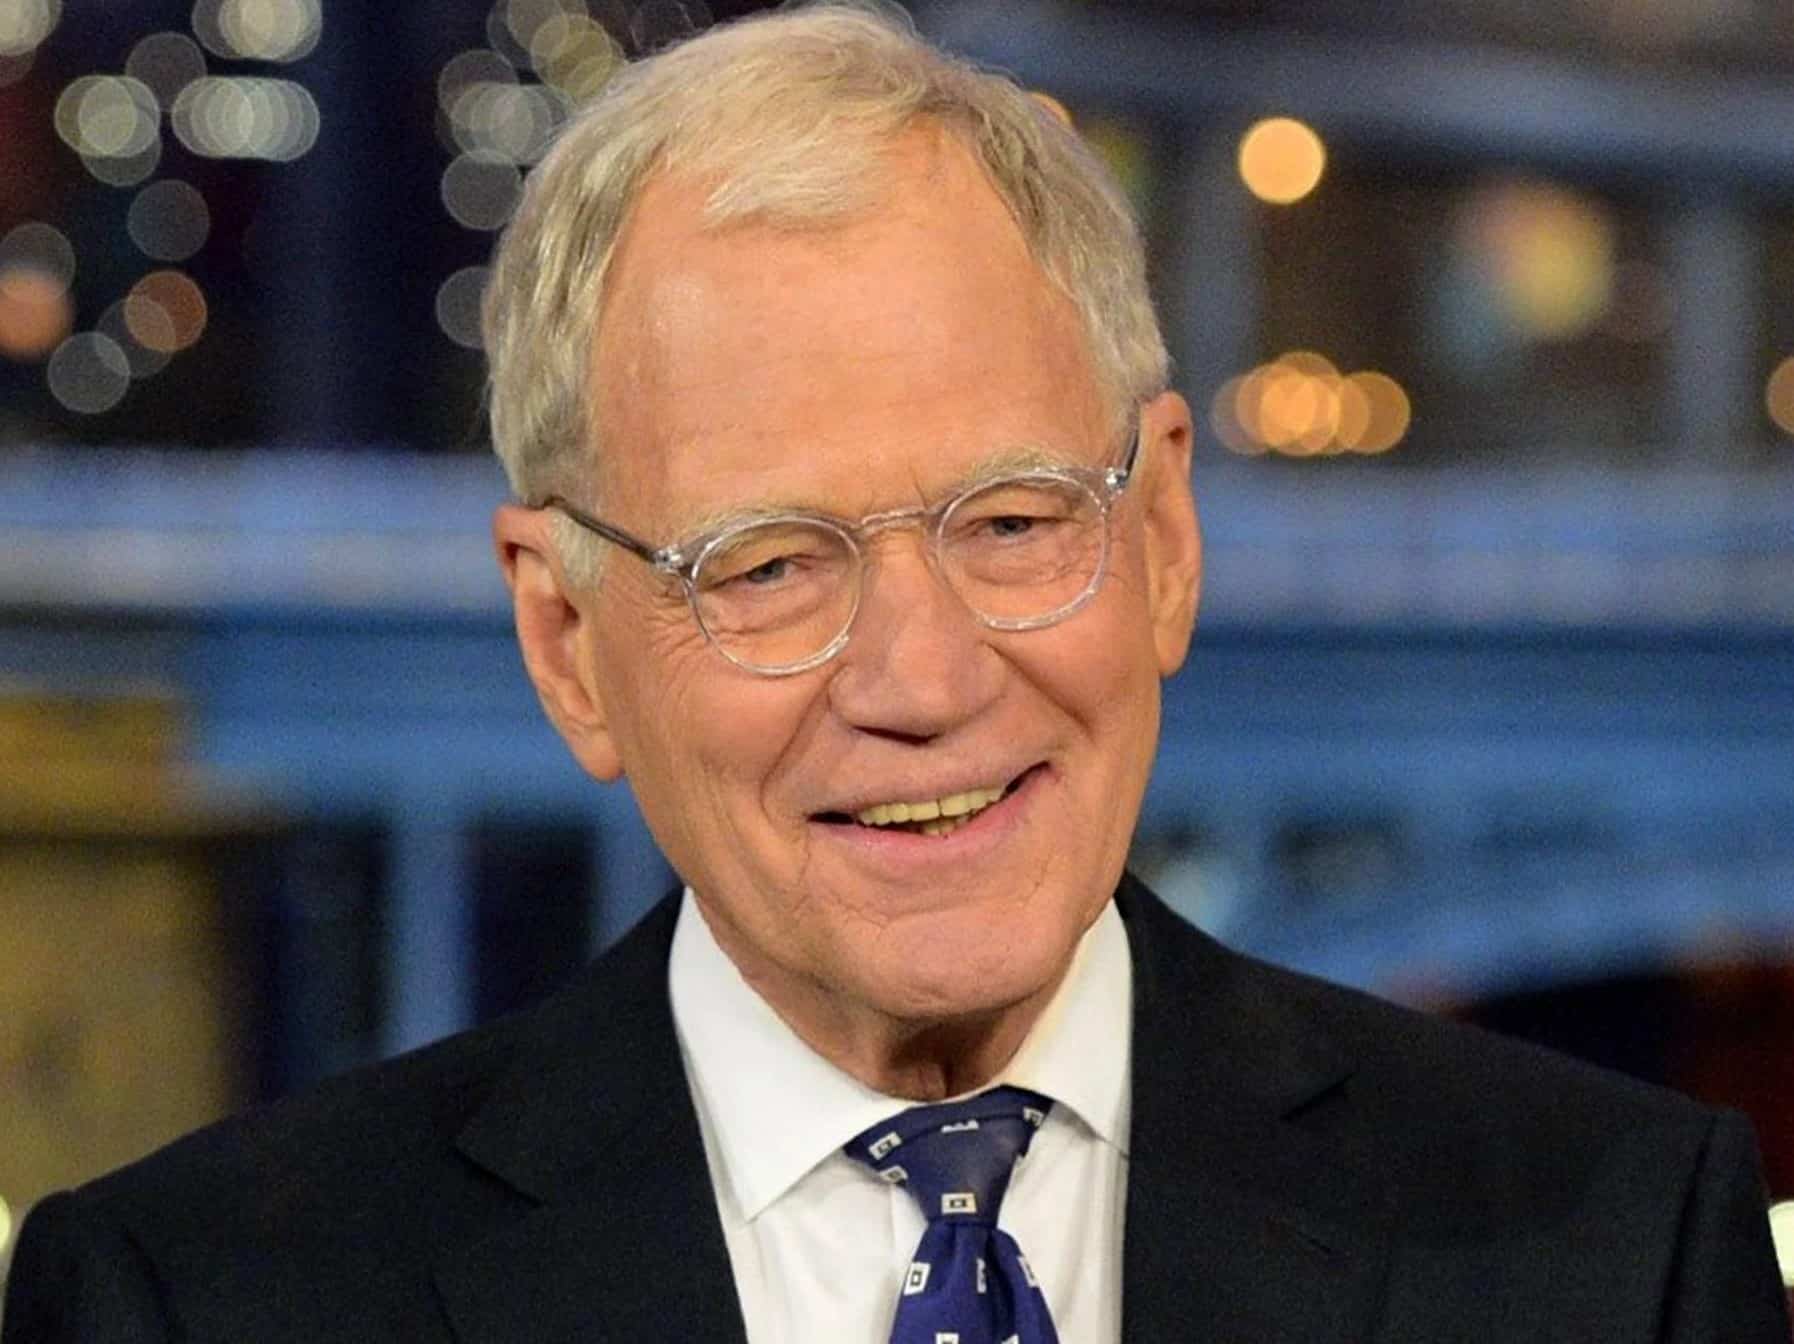 David Letterman possesses nearly 3,000 acres of property